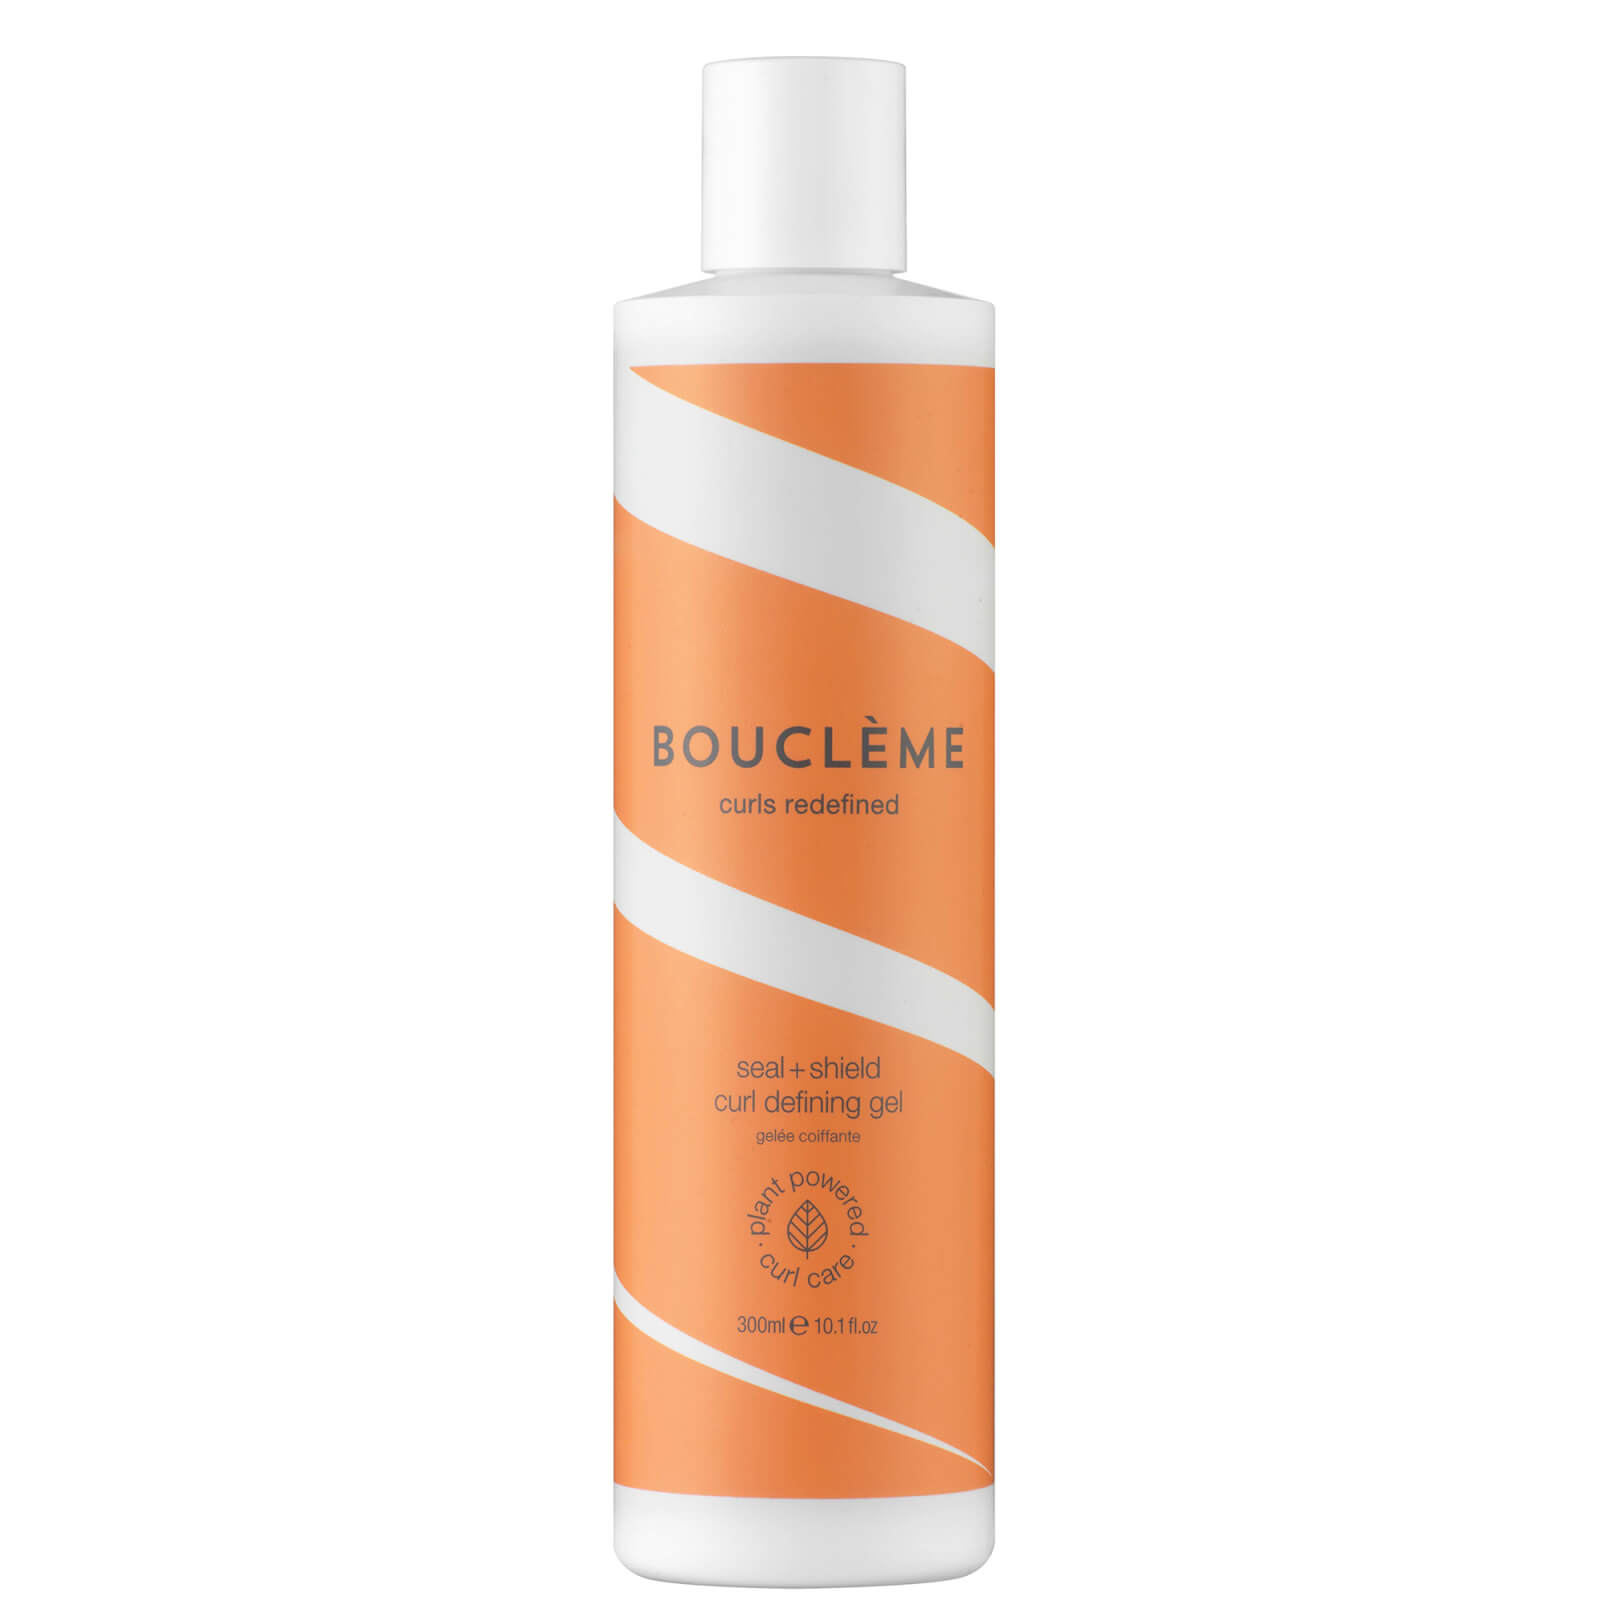 Boucleme Seal and Shield Styling Gel 300ml